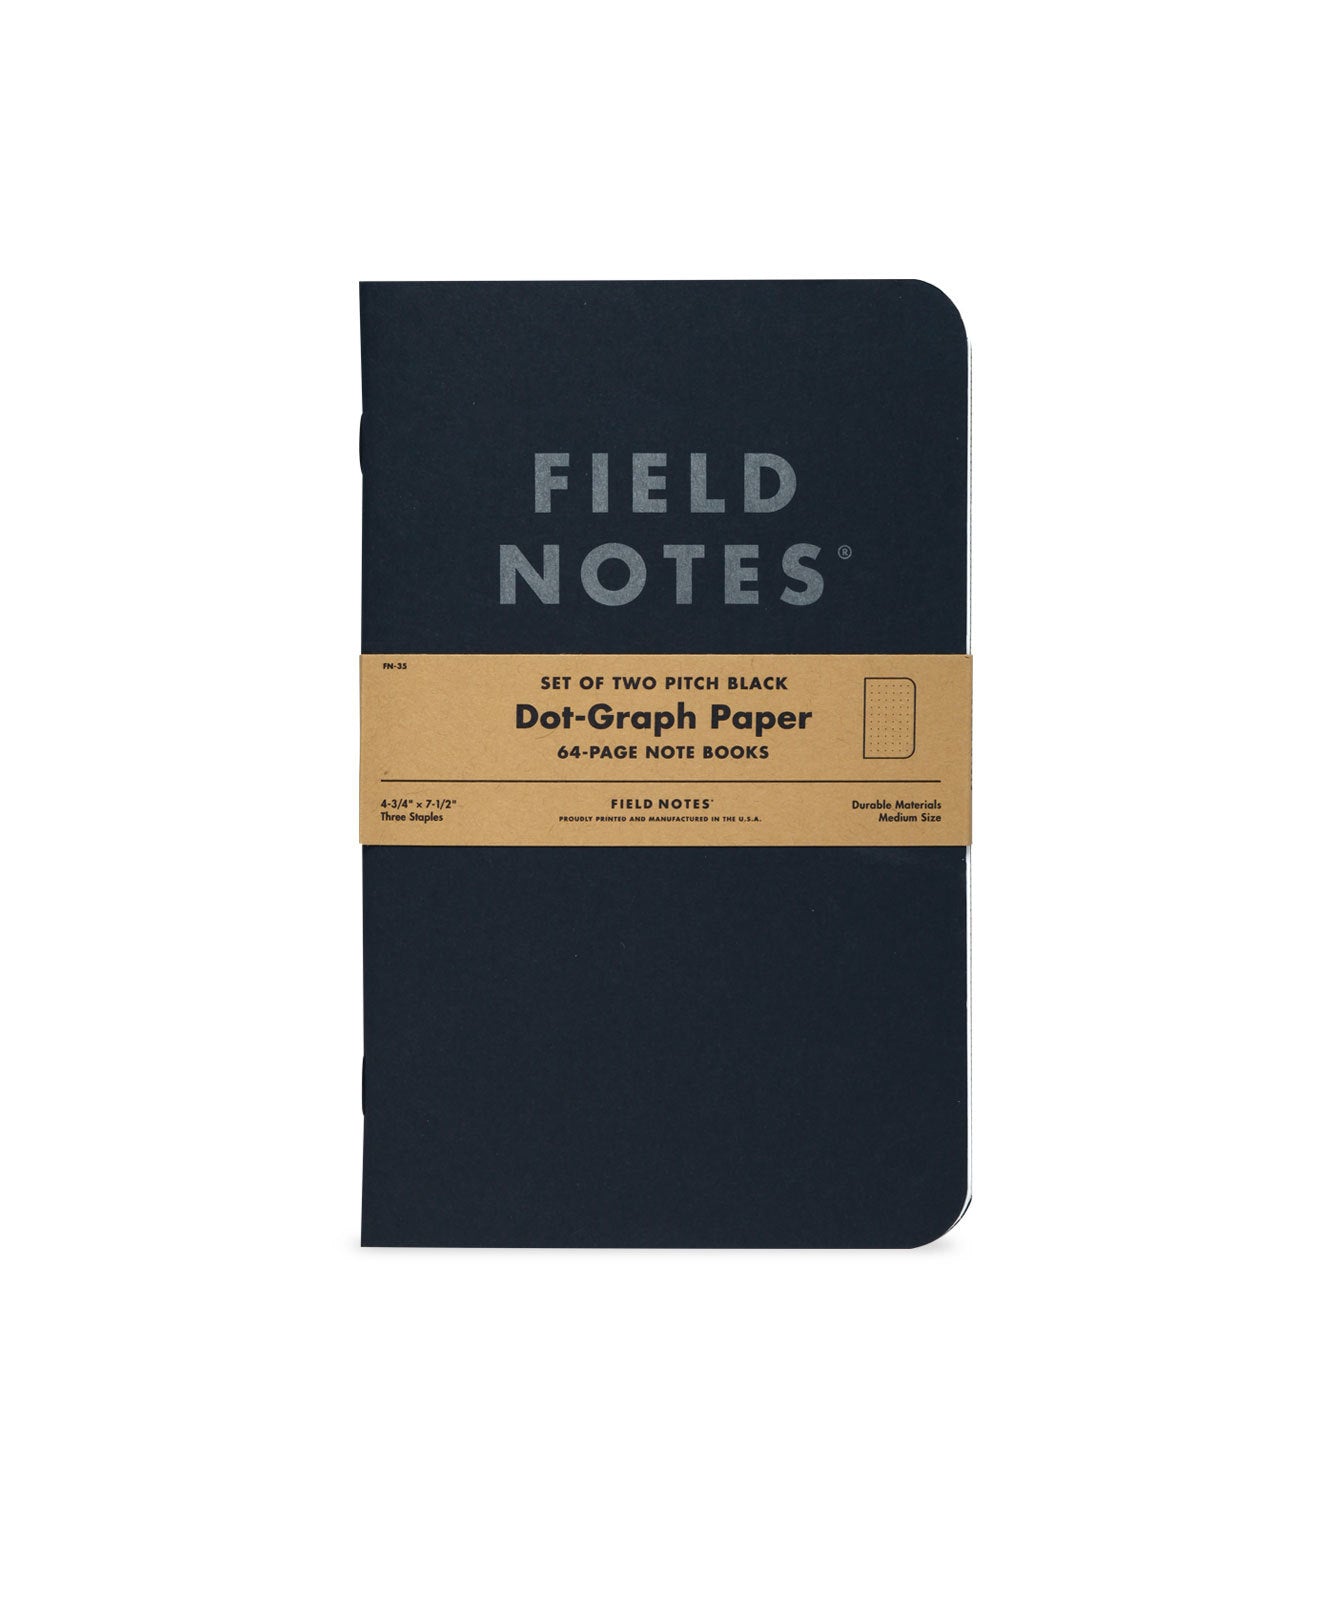 Front cover view of Pitch Black note book with dot grid pages, Field Notes logo in silver ink, and brown paper band with black text.